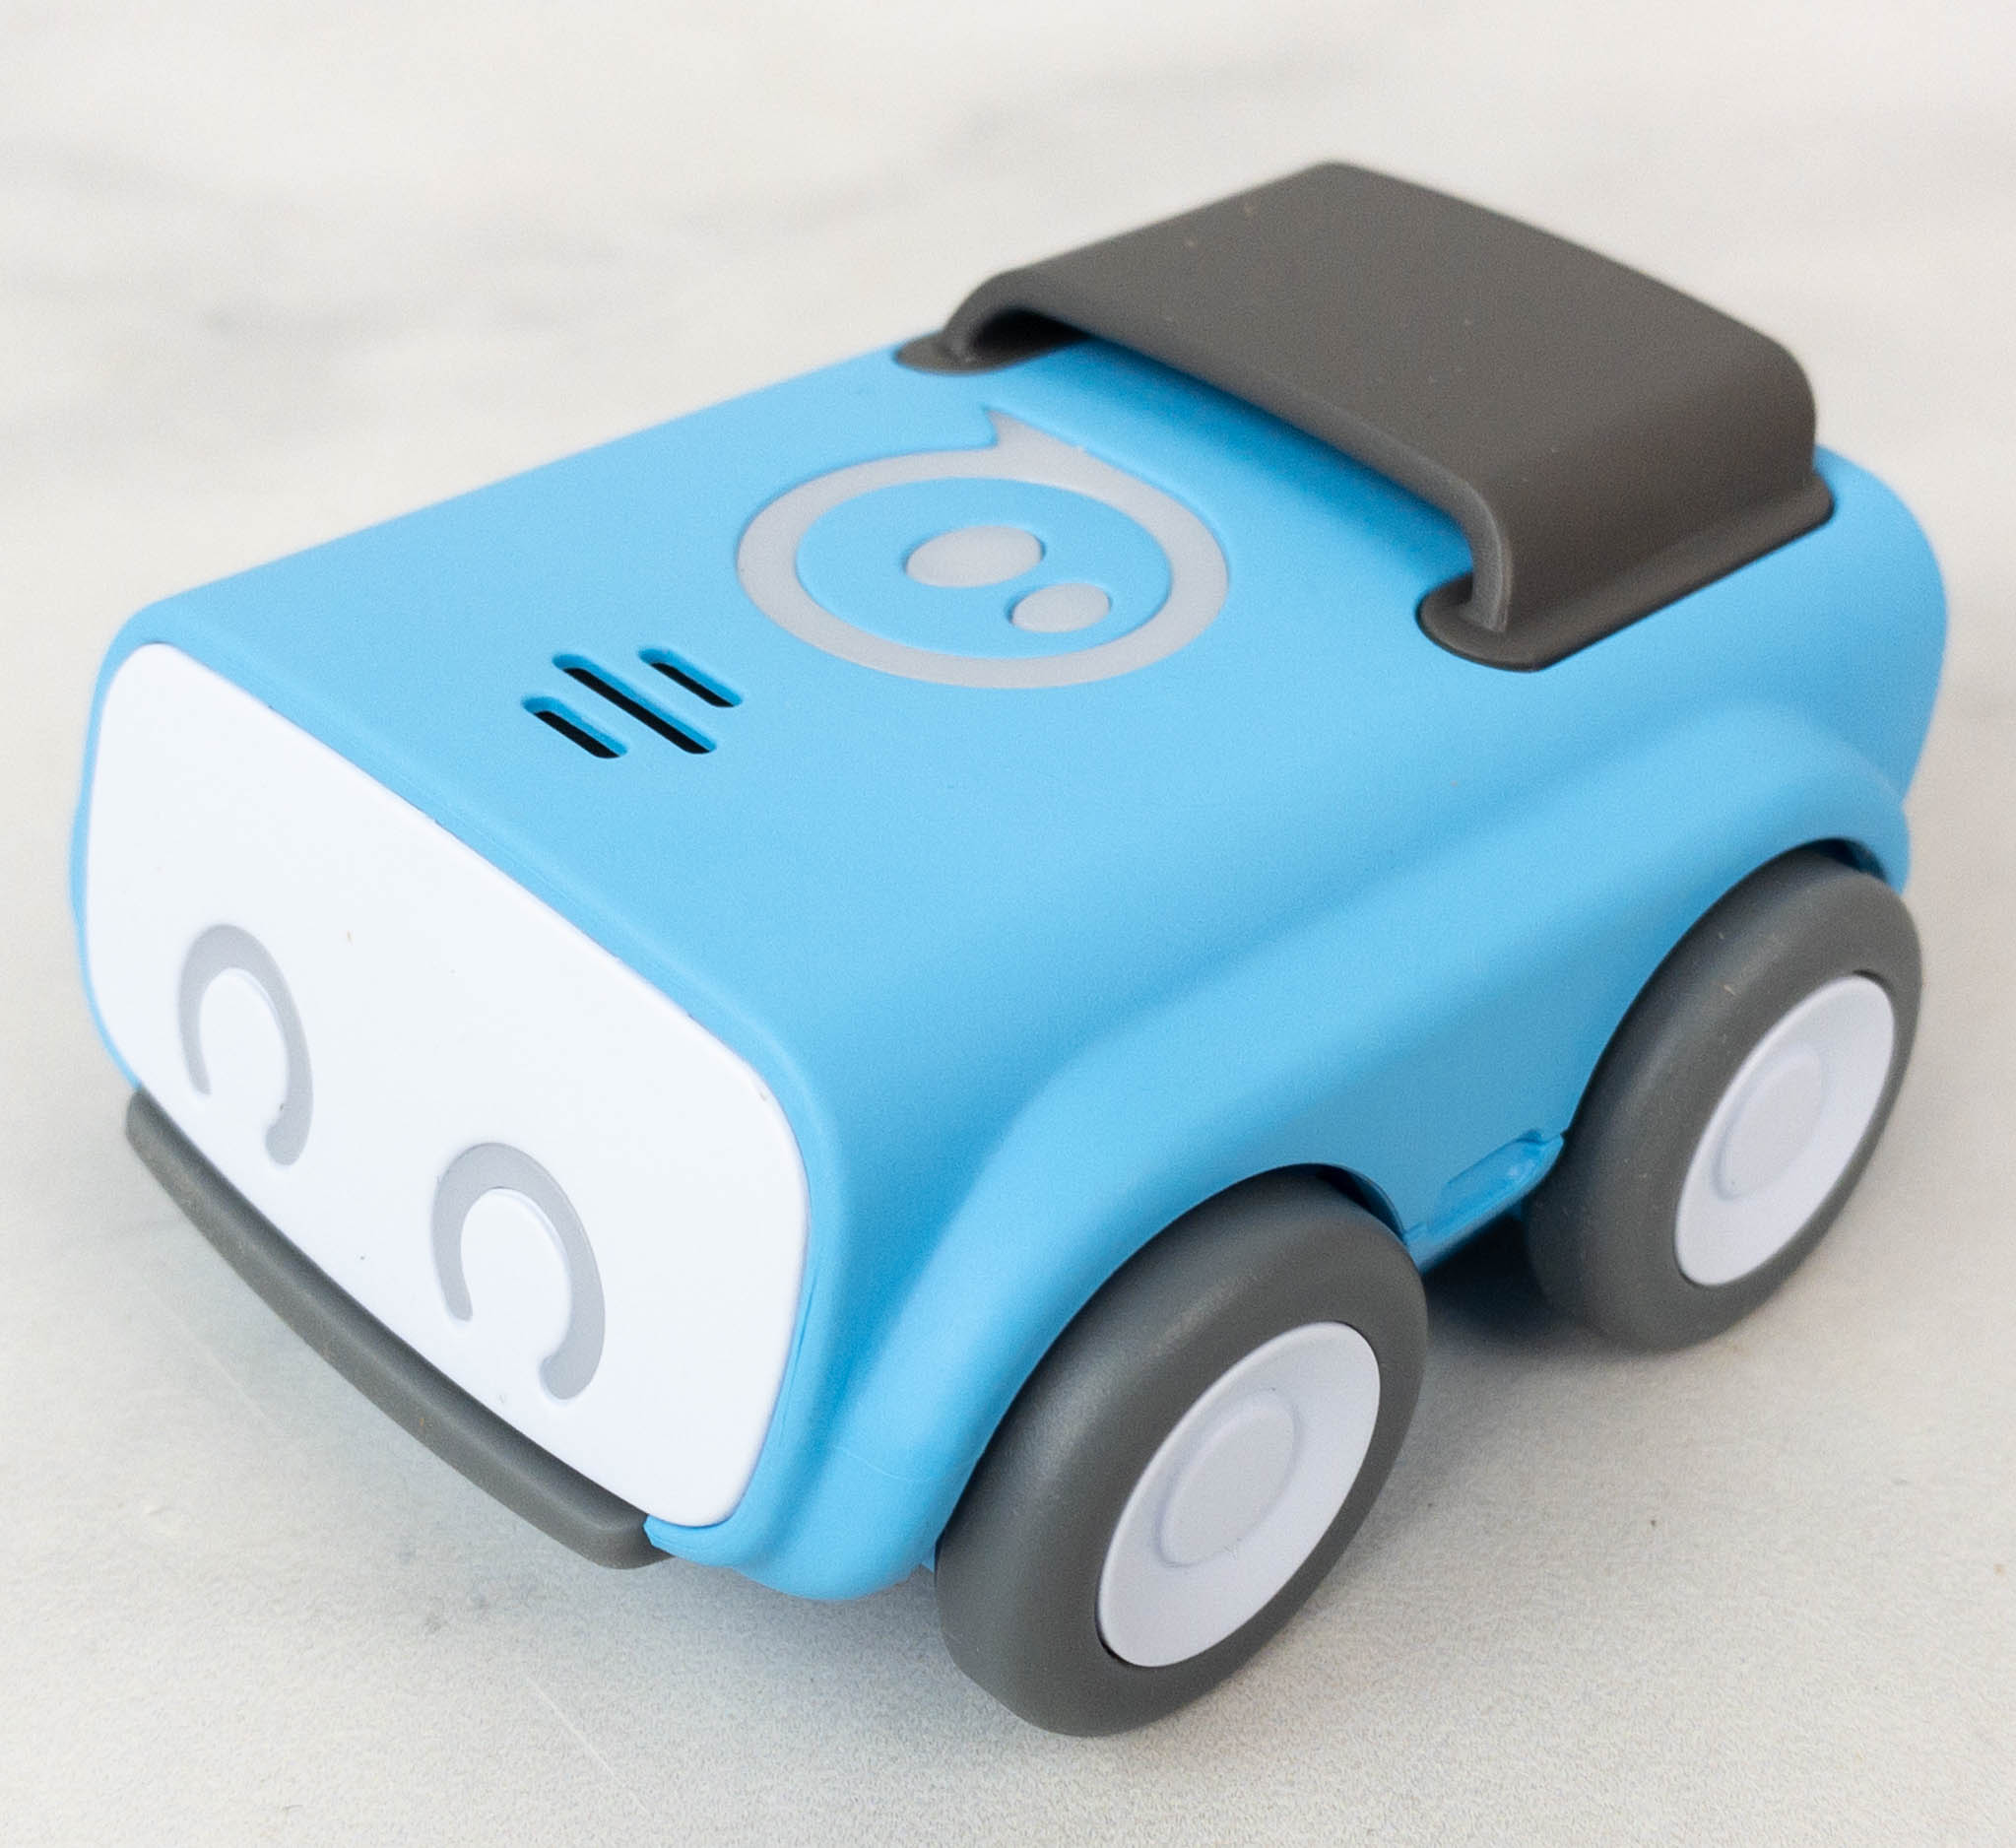 indi At-Home Learning Kit from Sphero  GADGETHEAD New Products Reviewed &  Rated